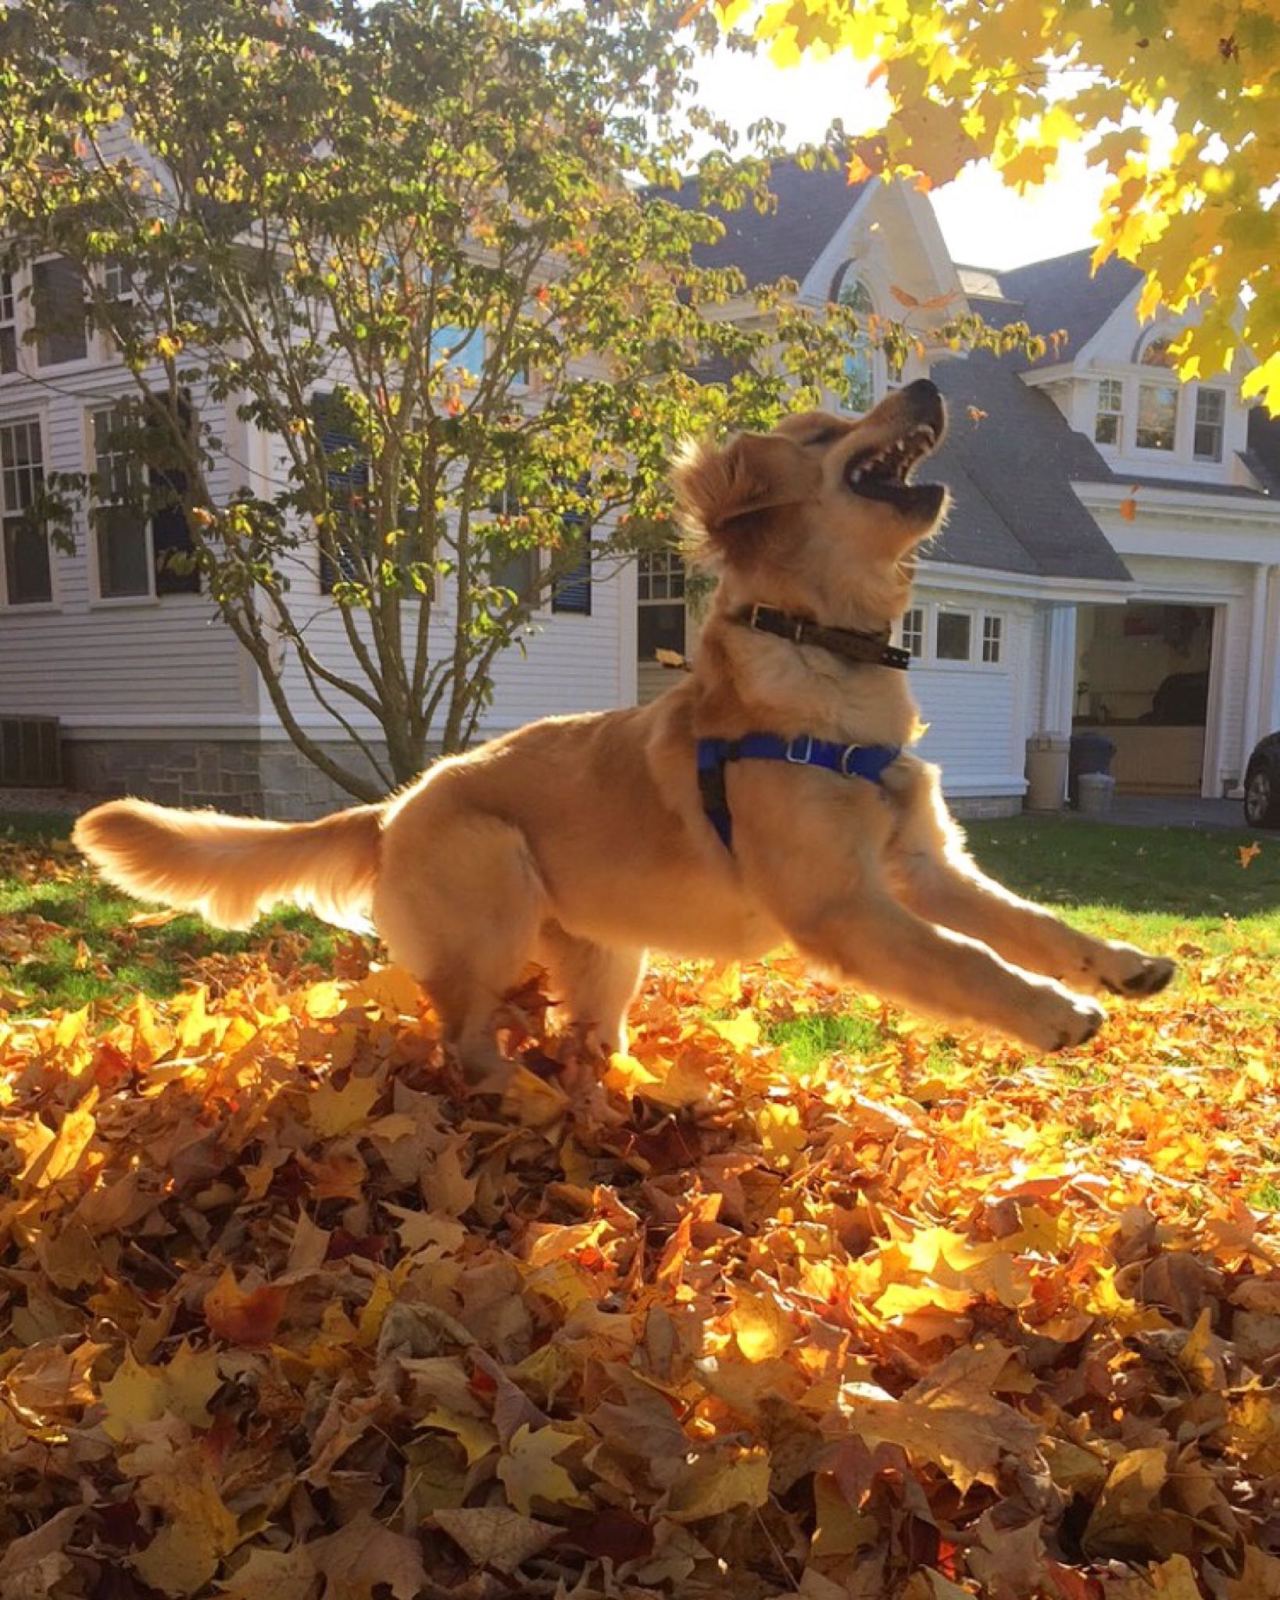 Puppy playing in the leaves for the first time (Source: http://ift.tt/2e1aixj)